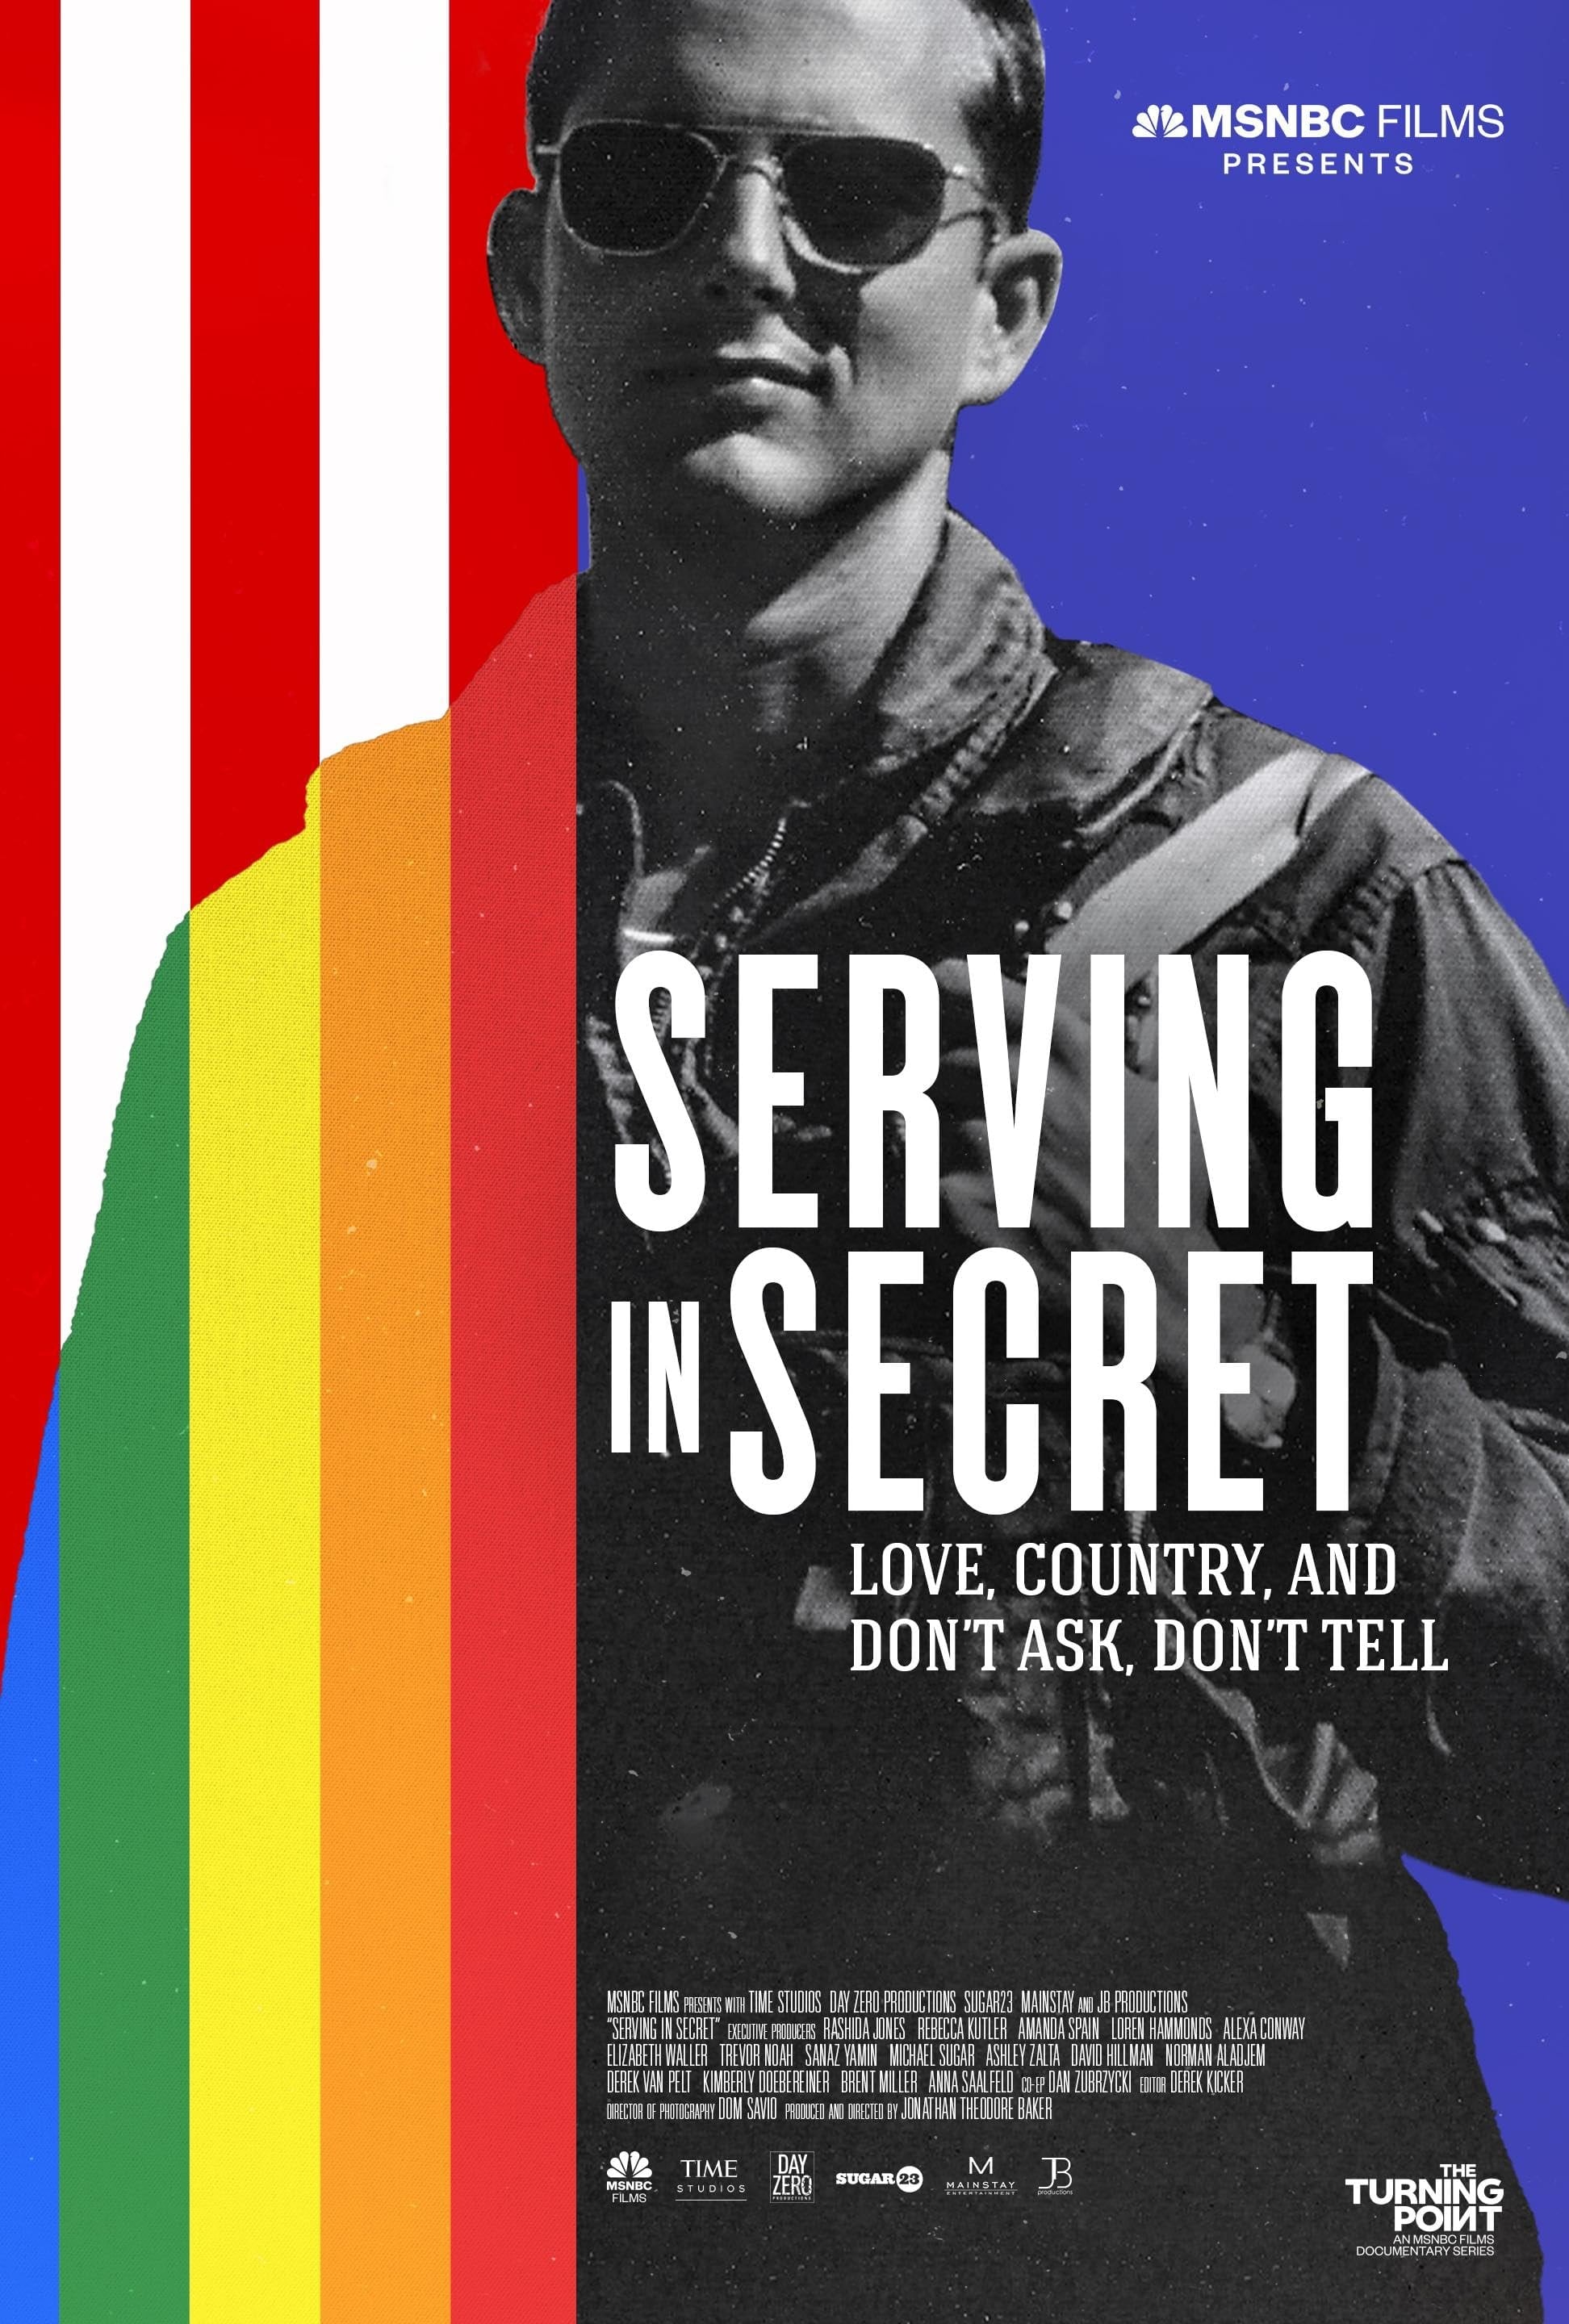 Serving in Secret: Love, Country, and Don't Ask, Don't Tell